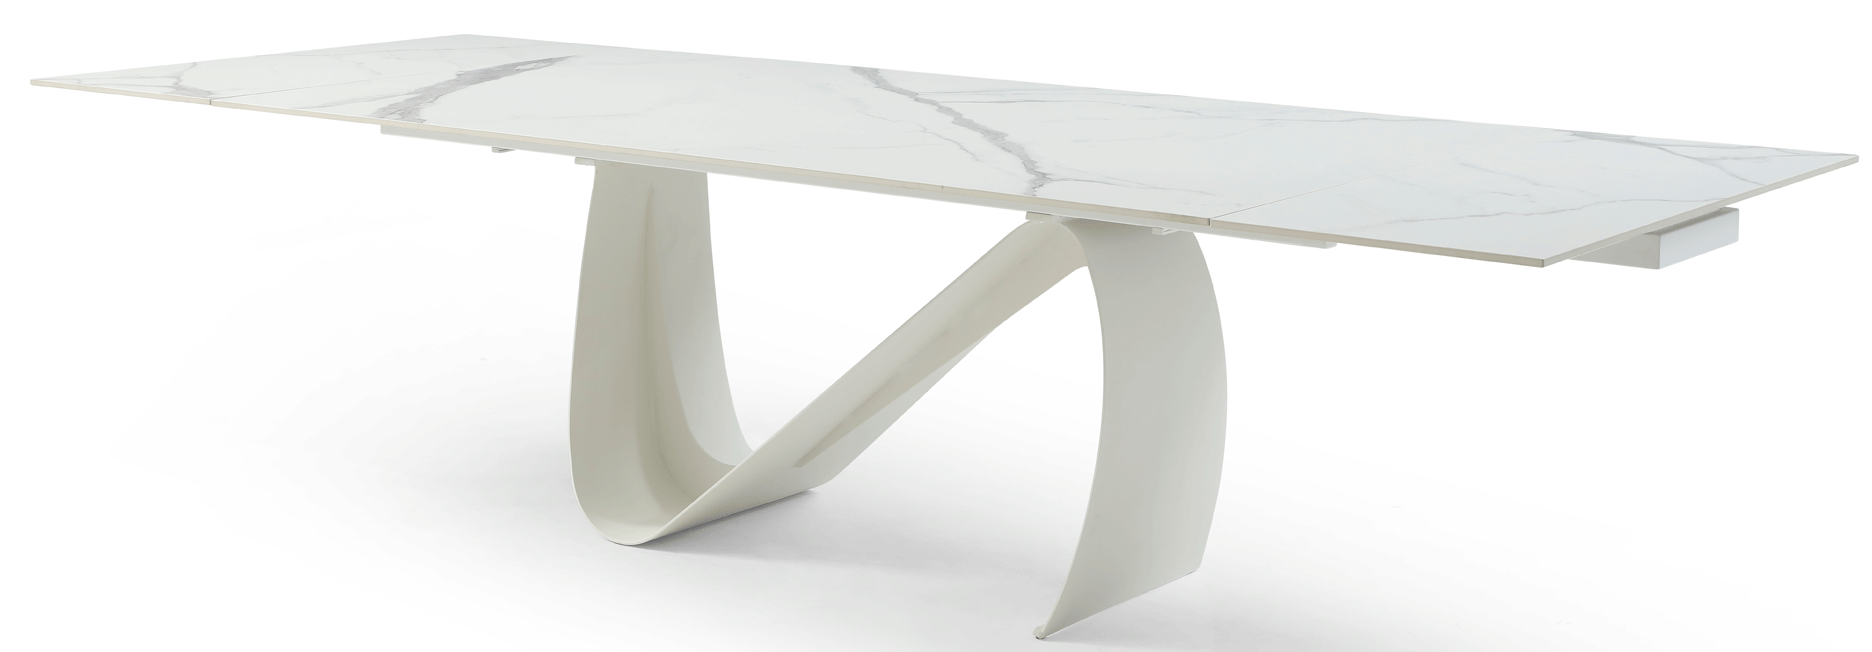 ESF Extravaganza Collection 9087 Dining Table White i37528